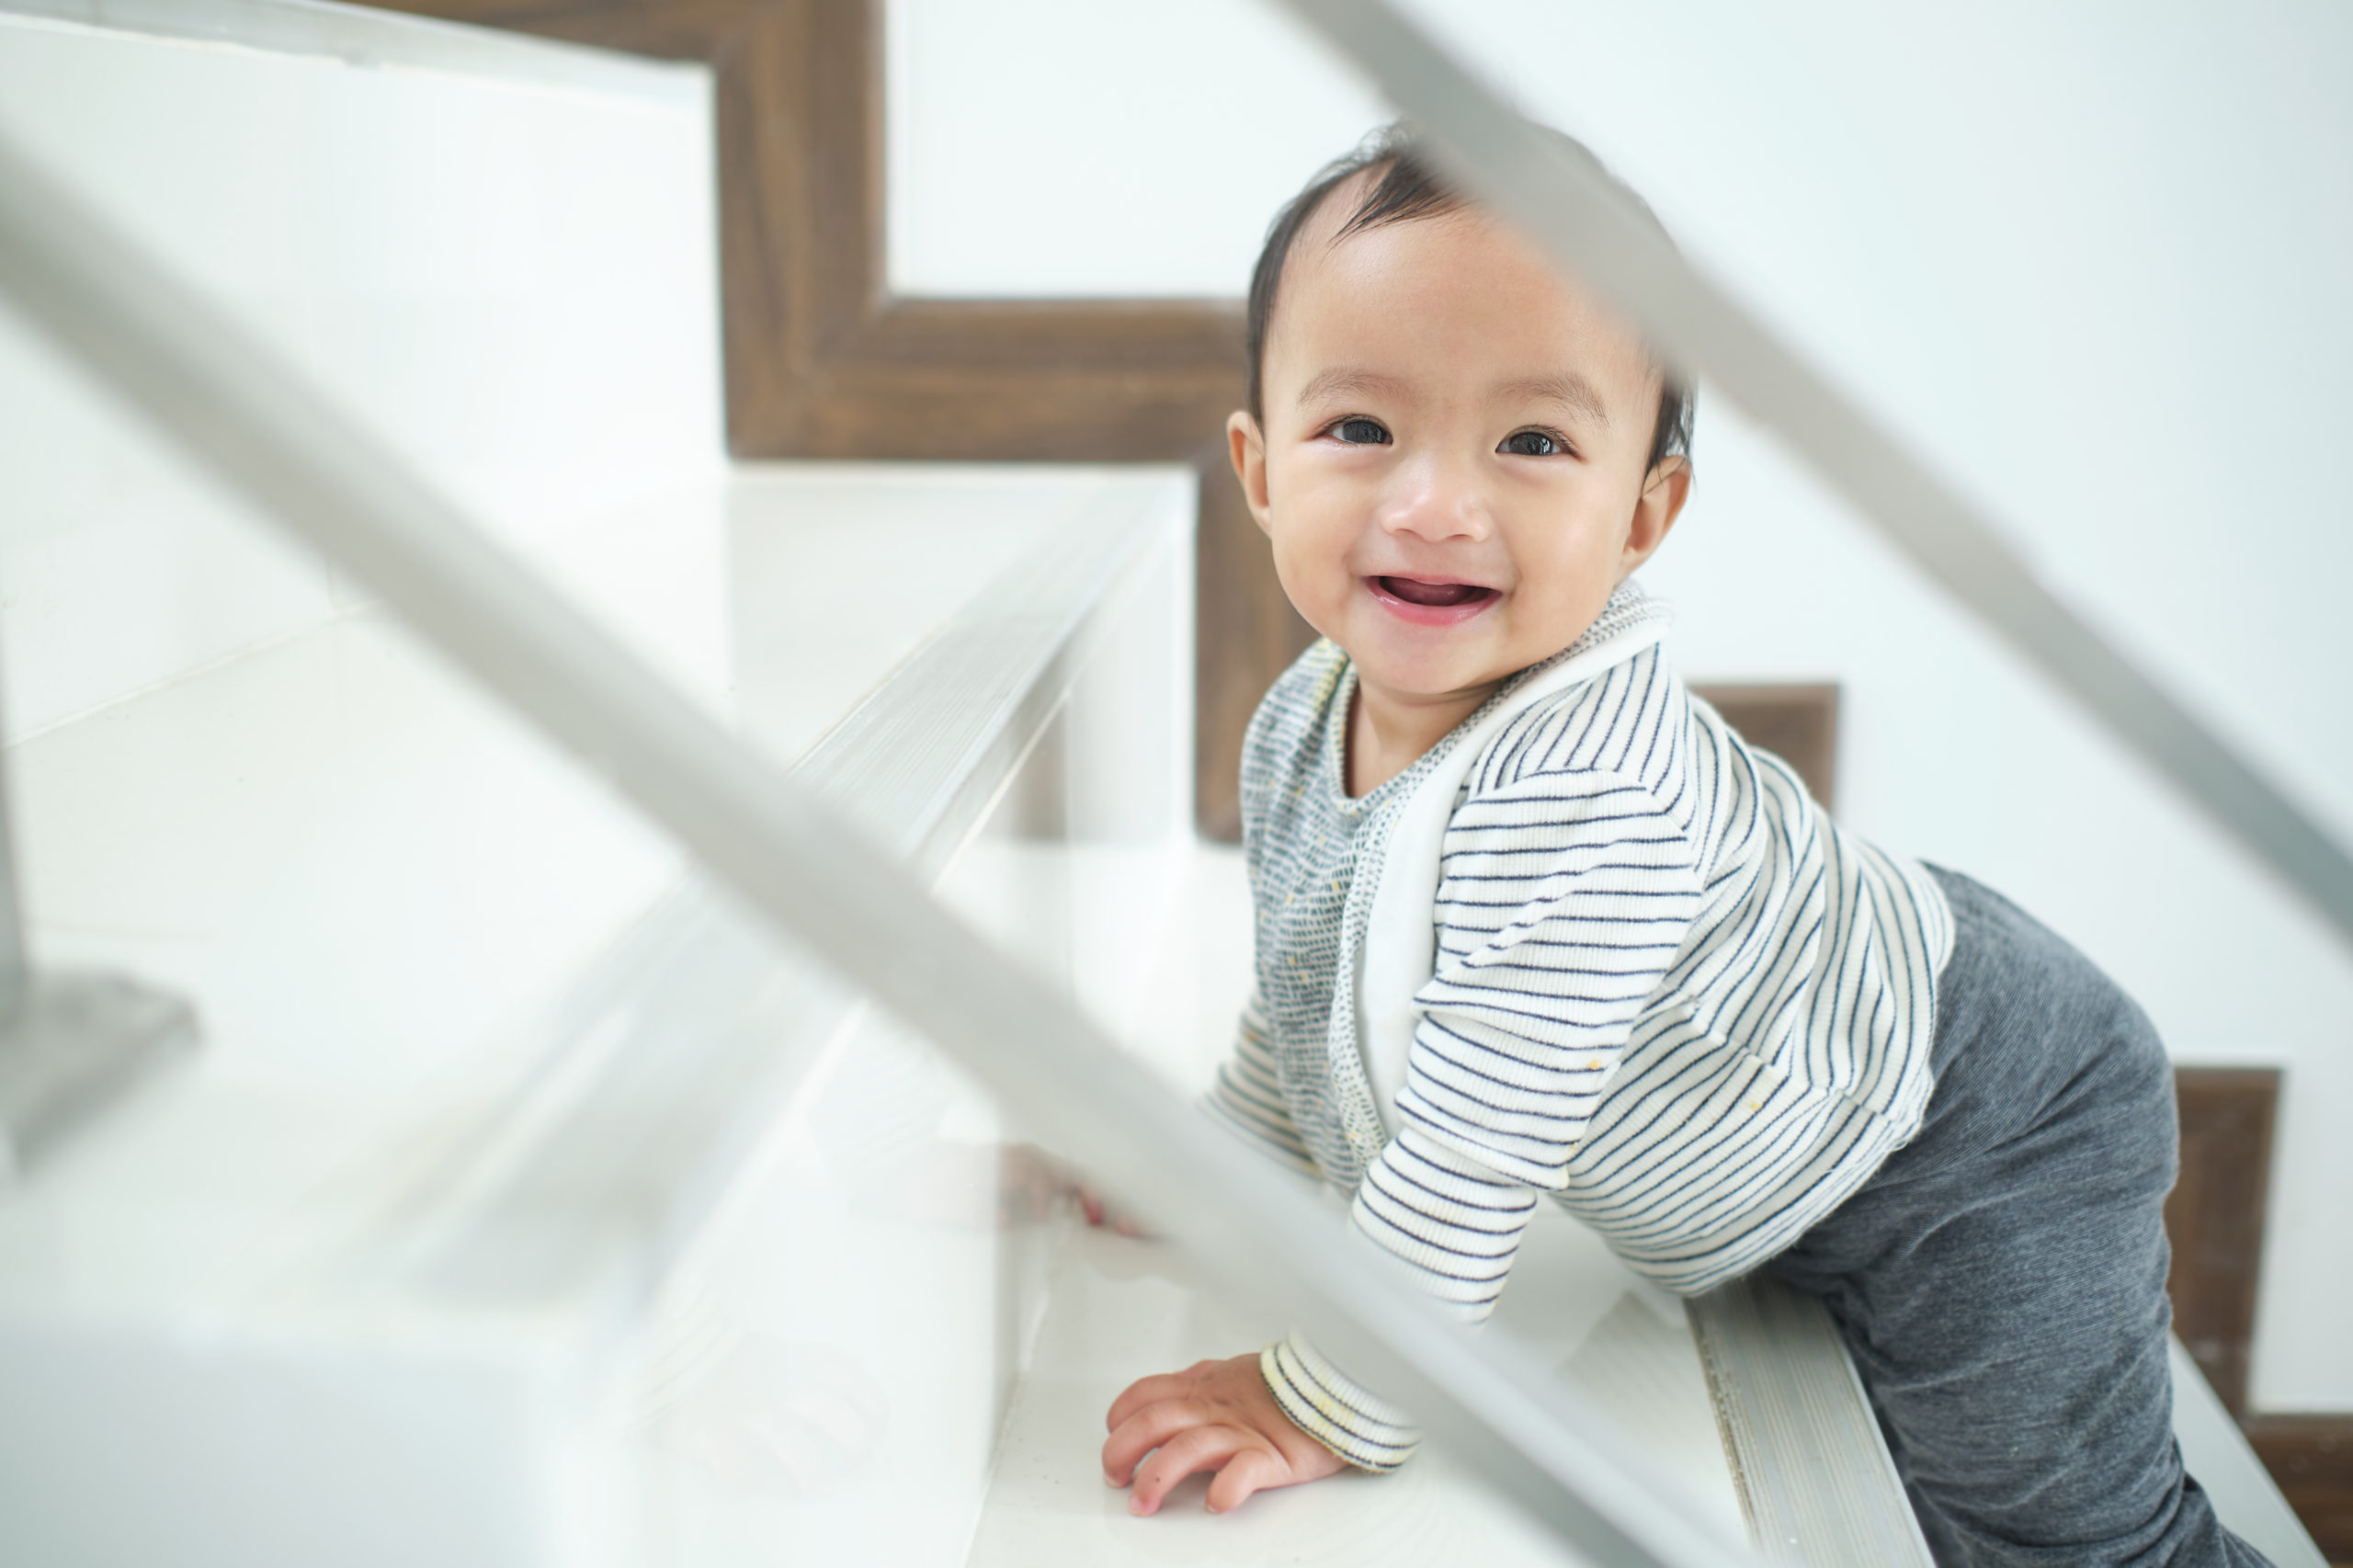 Childproofing Tips for New Parents at Kids 'R' Kids Charlotte, preschool, daycare, childcare